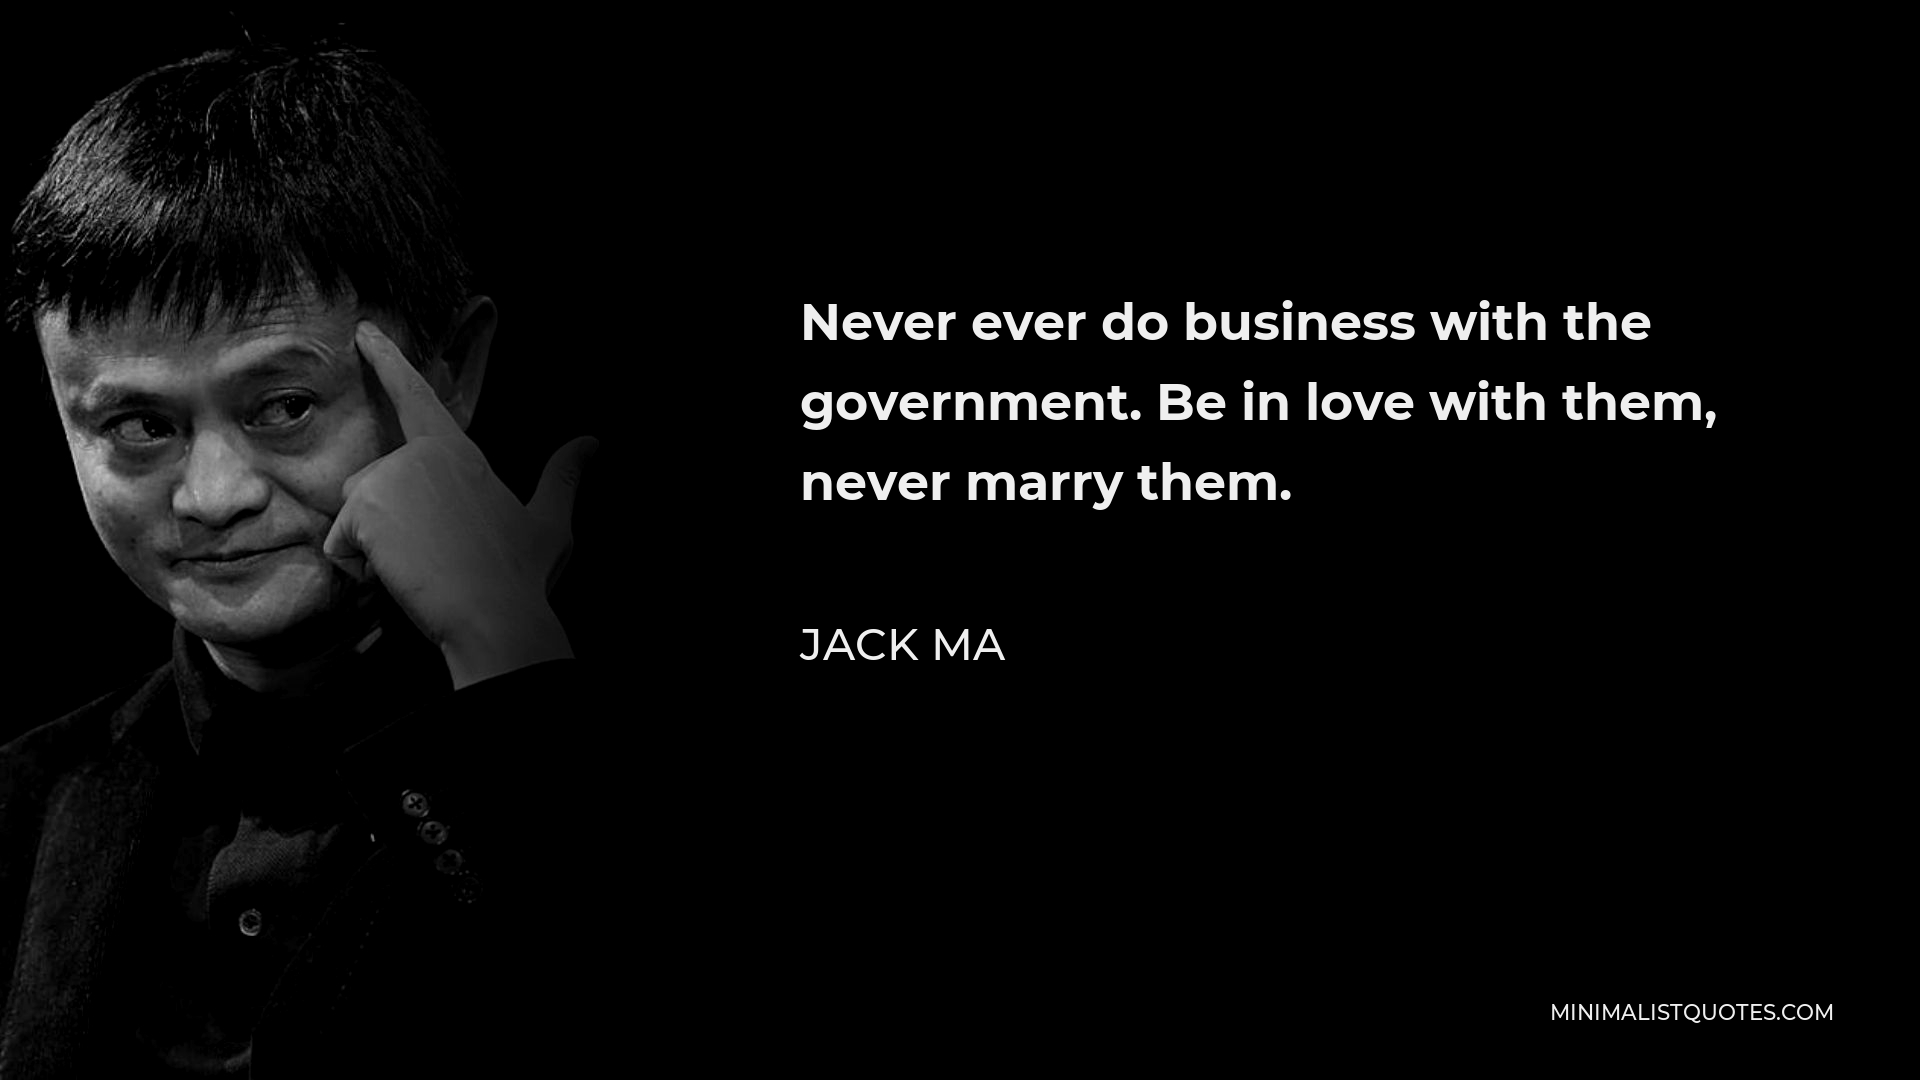 Jack Ma Quote - Never ever do business with the government. Be in love with them, never marry them.